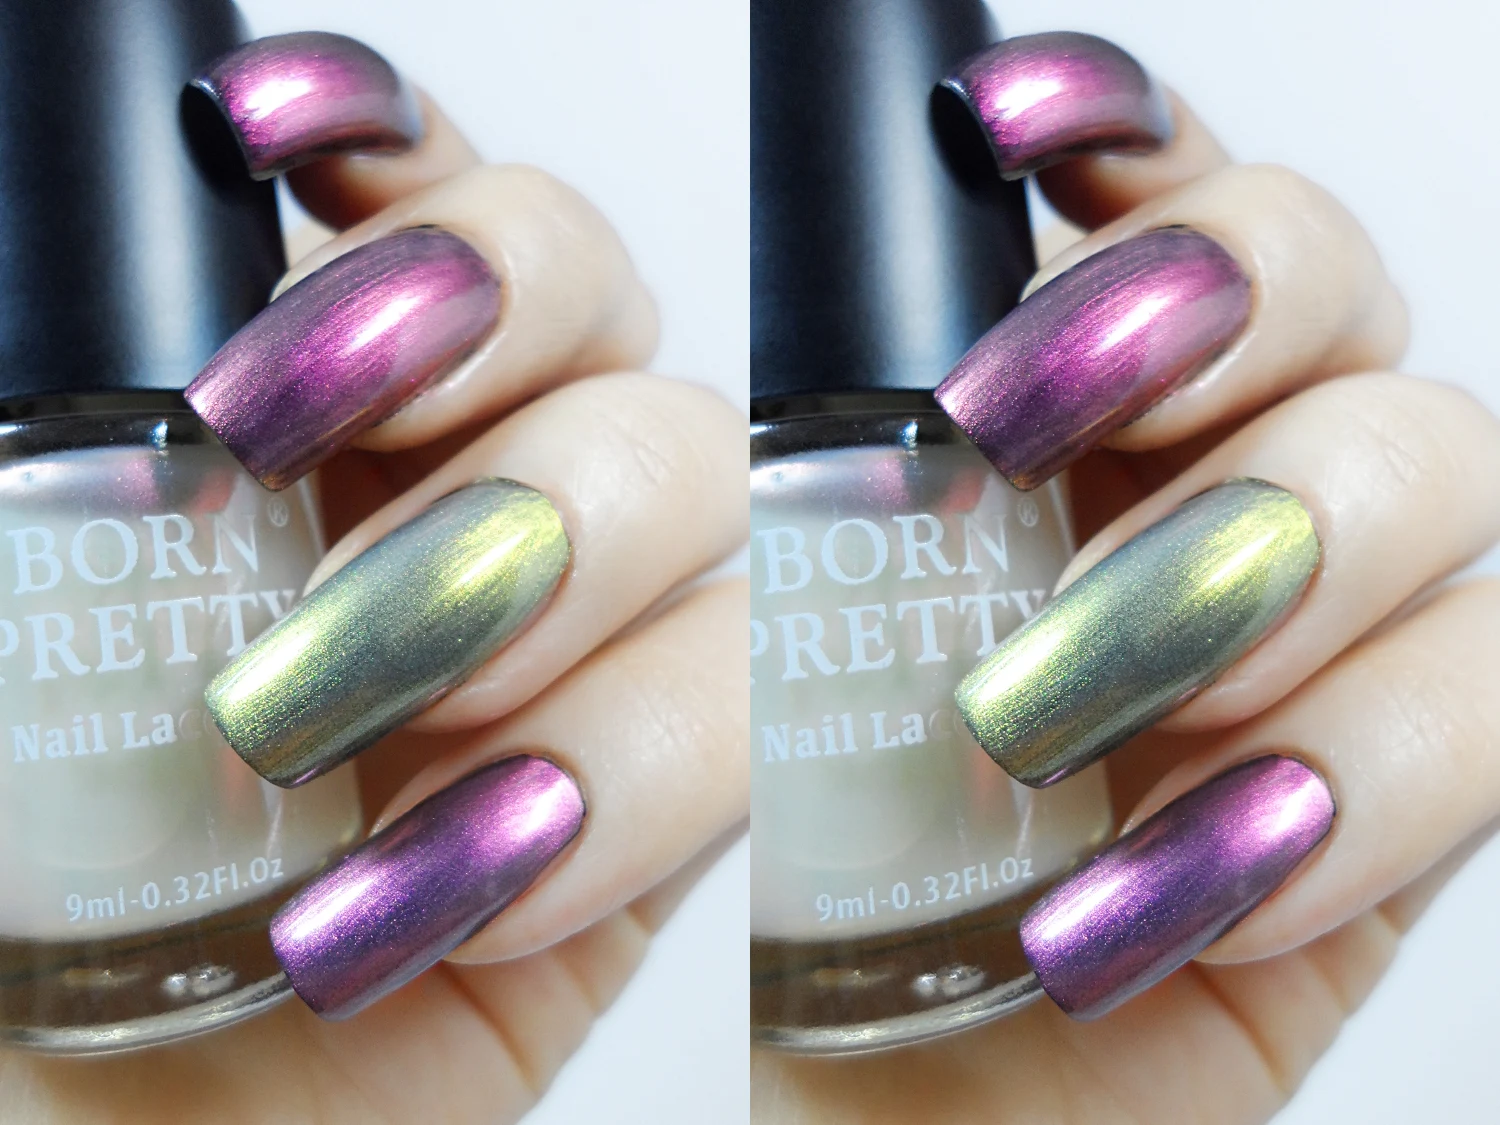 close-up five iridescent nail polishes on a plainstudio's background